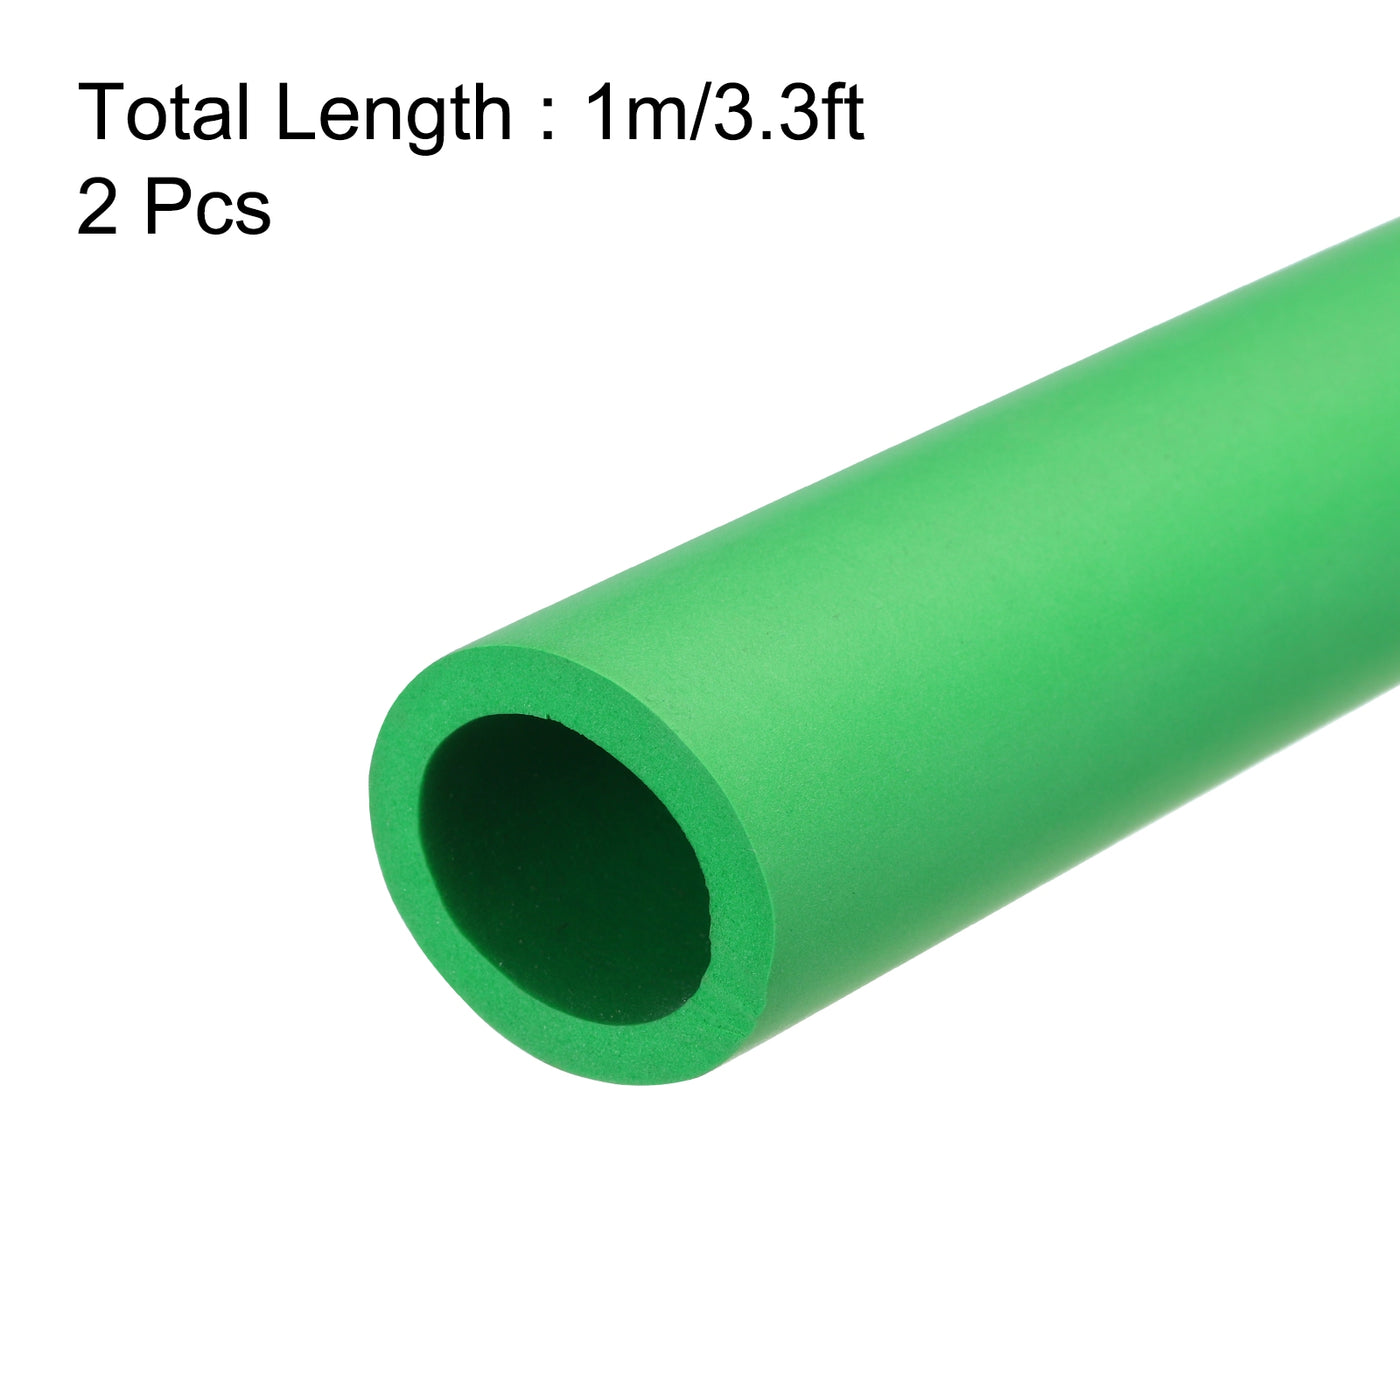 uxcell Uxcell 2pcs 3.3ft Pipe Insulation Tube 1 Inch(25mm) ID 35mm OD Foam Tubing for Handle Grip Support, Green